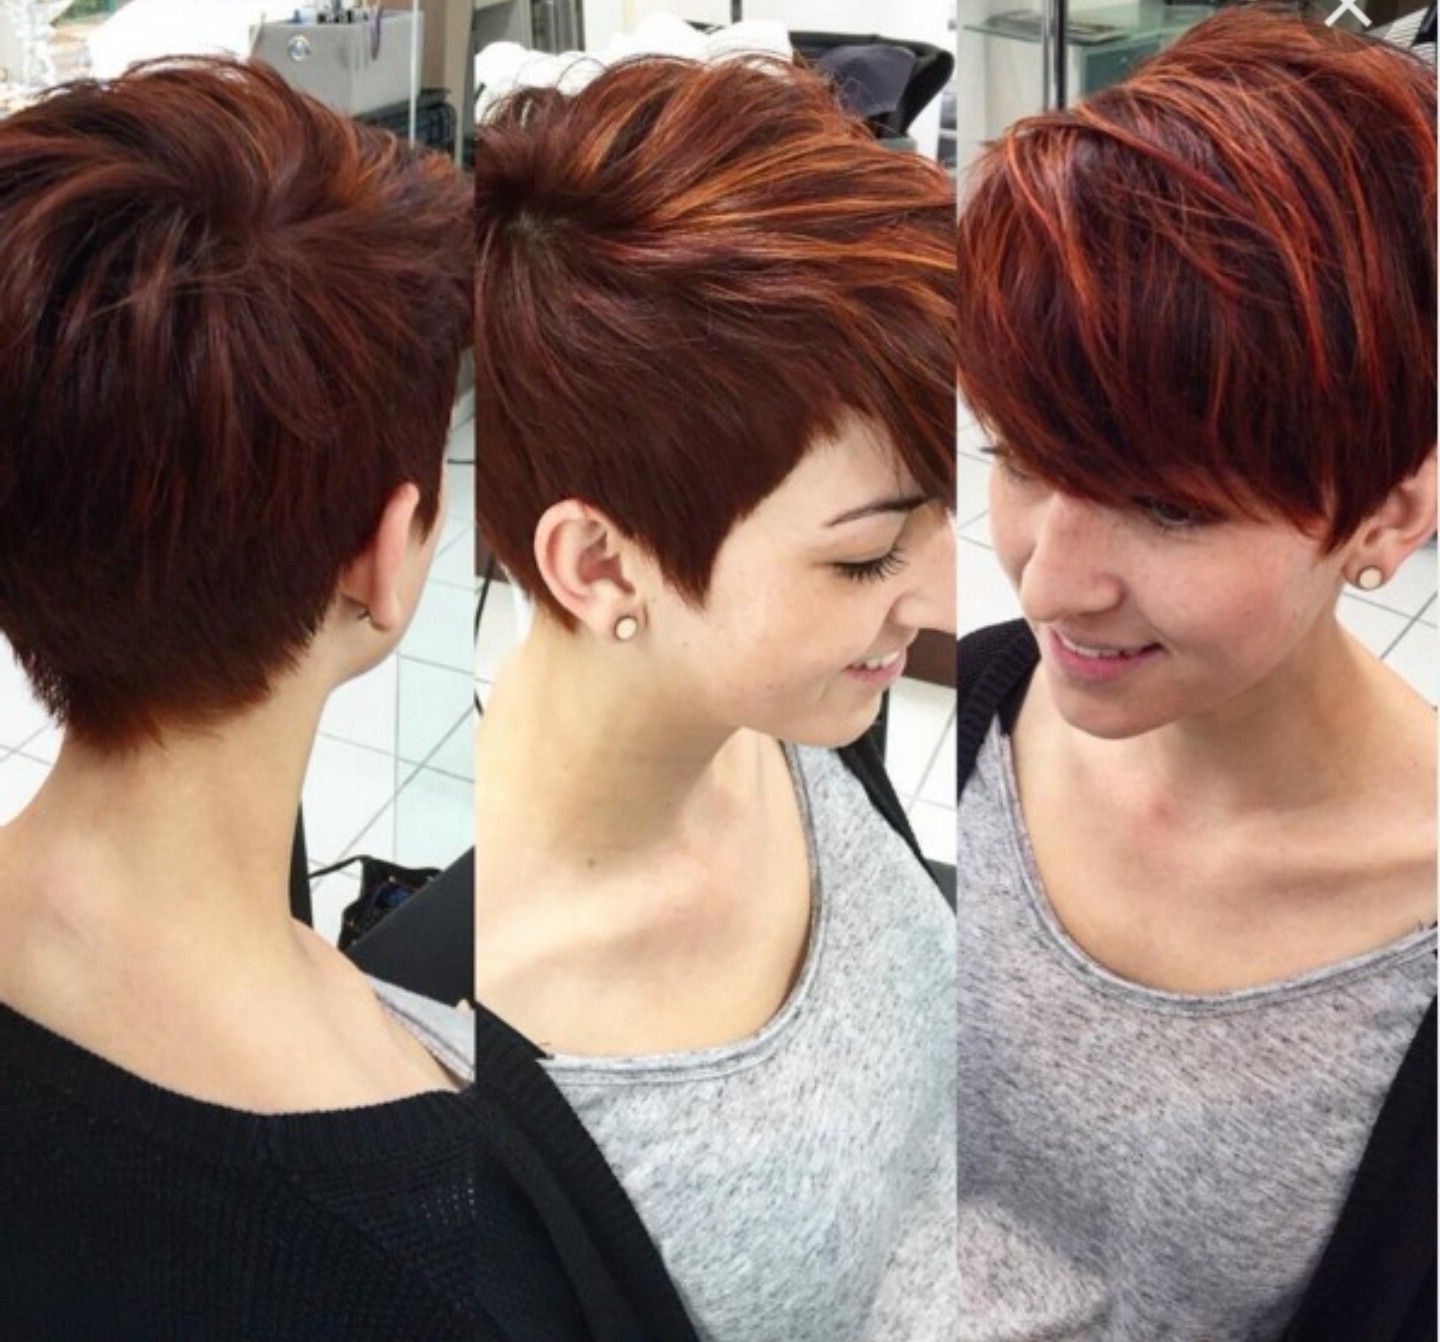 Caramel Colored Pixie With Long Side Bangs | Hair | Pinterest Intended For Most Up To Date Short Pixie Hairstyles With Bangs (Photo 9 of 15)